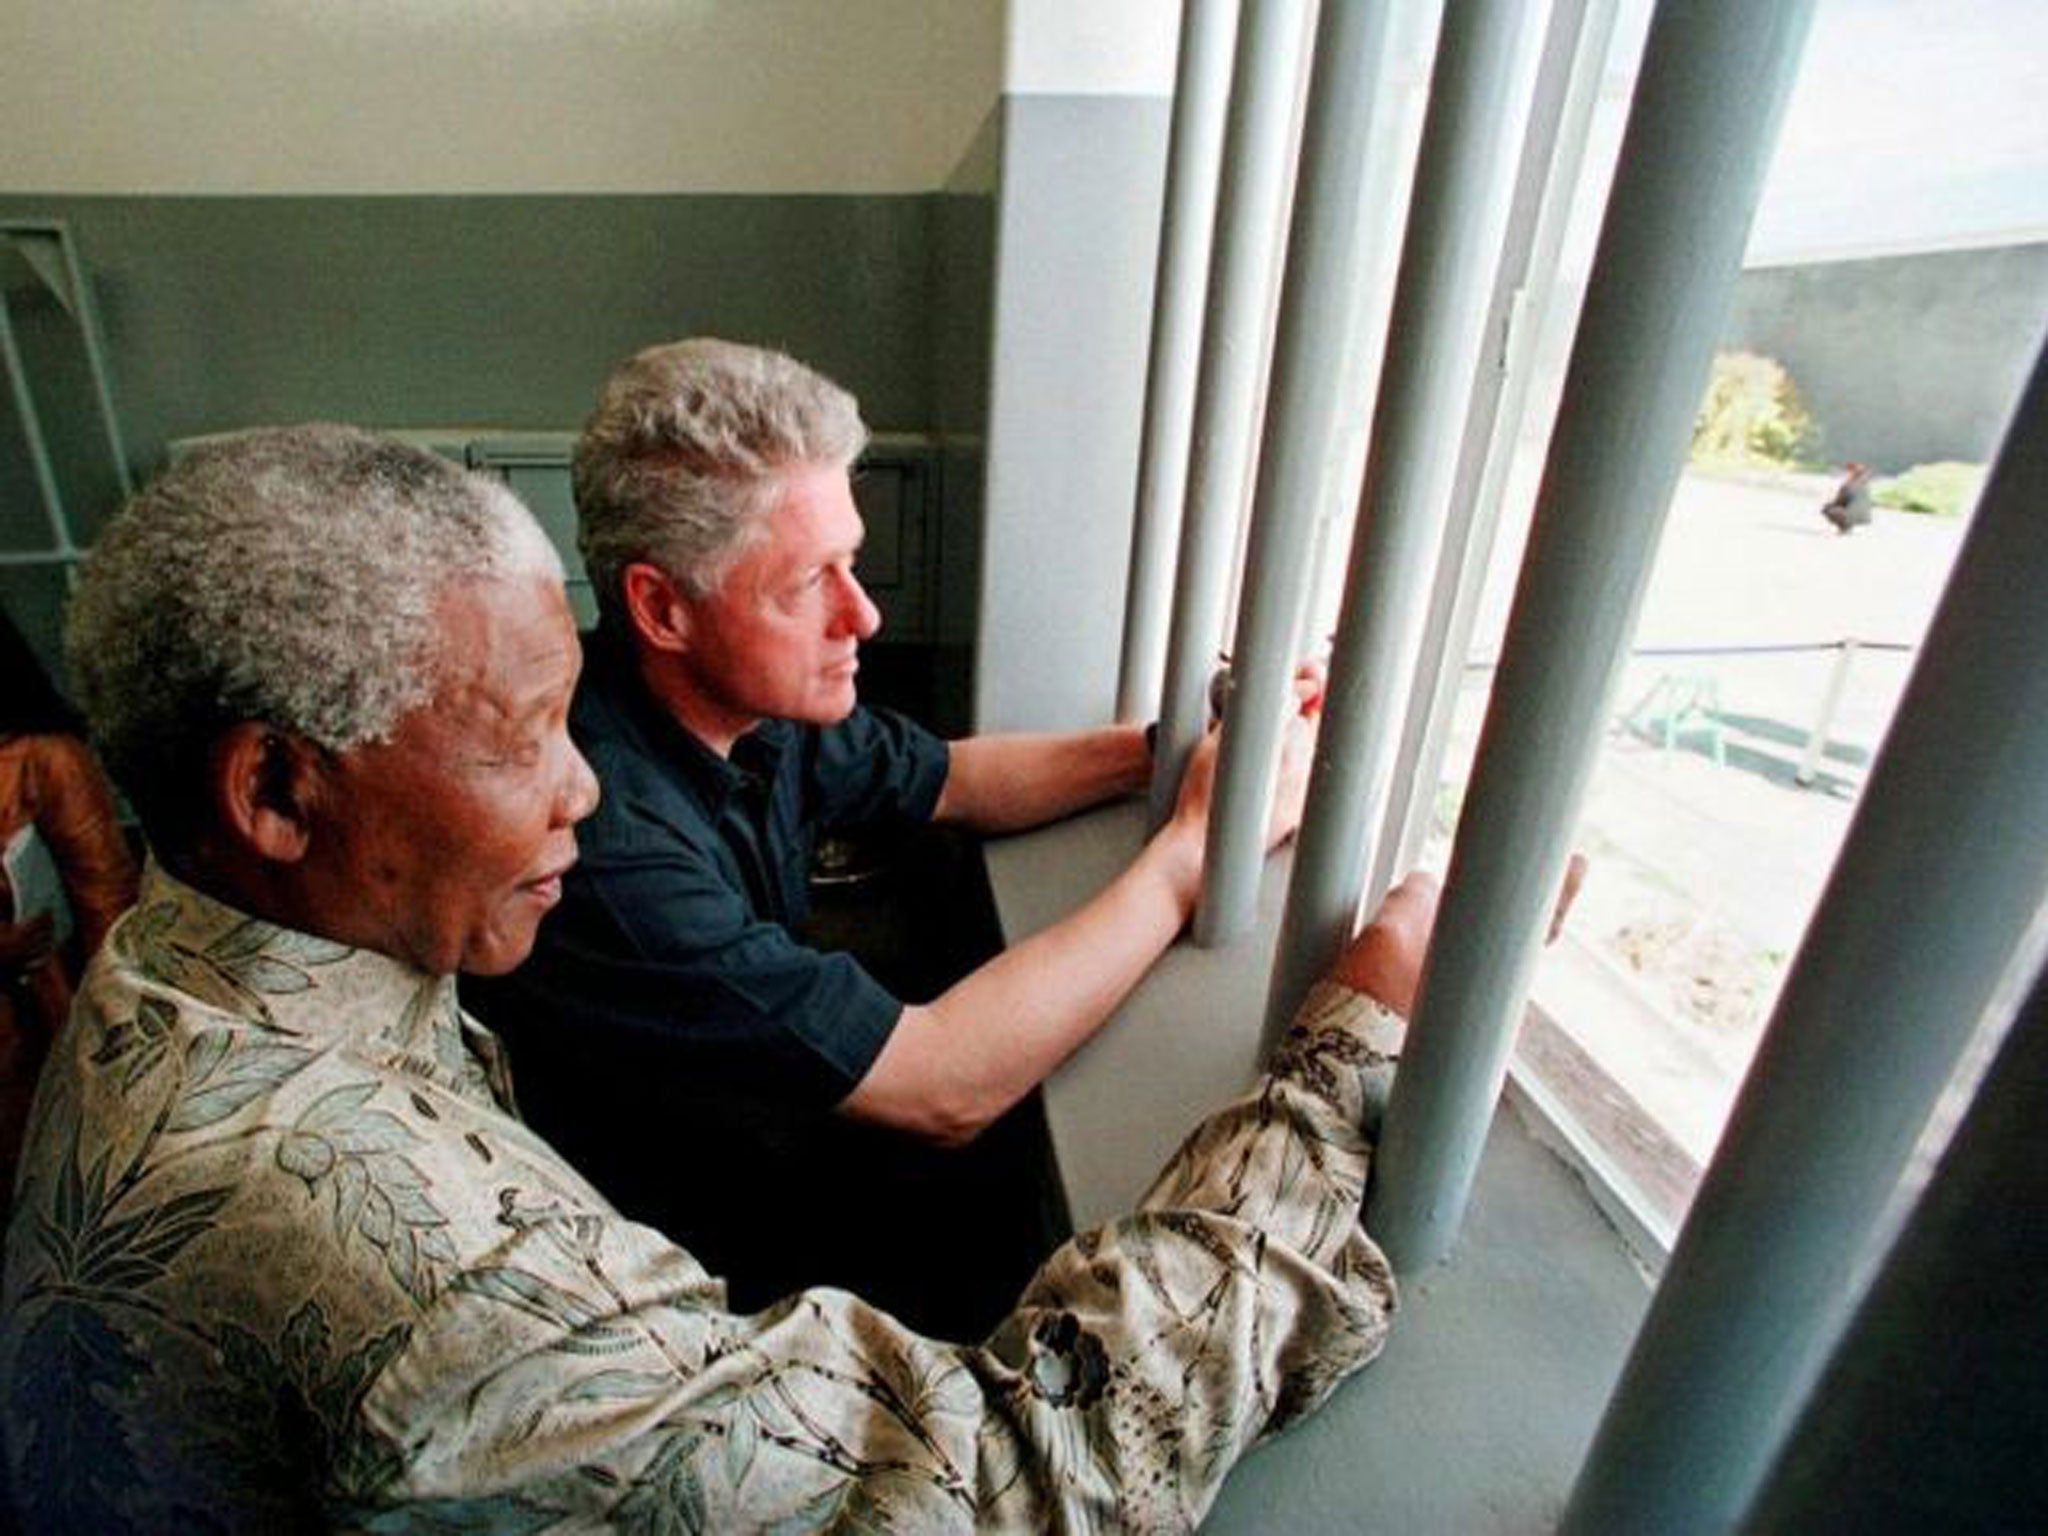 Mandela with Bill Clinton on the island where he was imprisoned